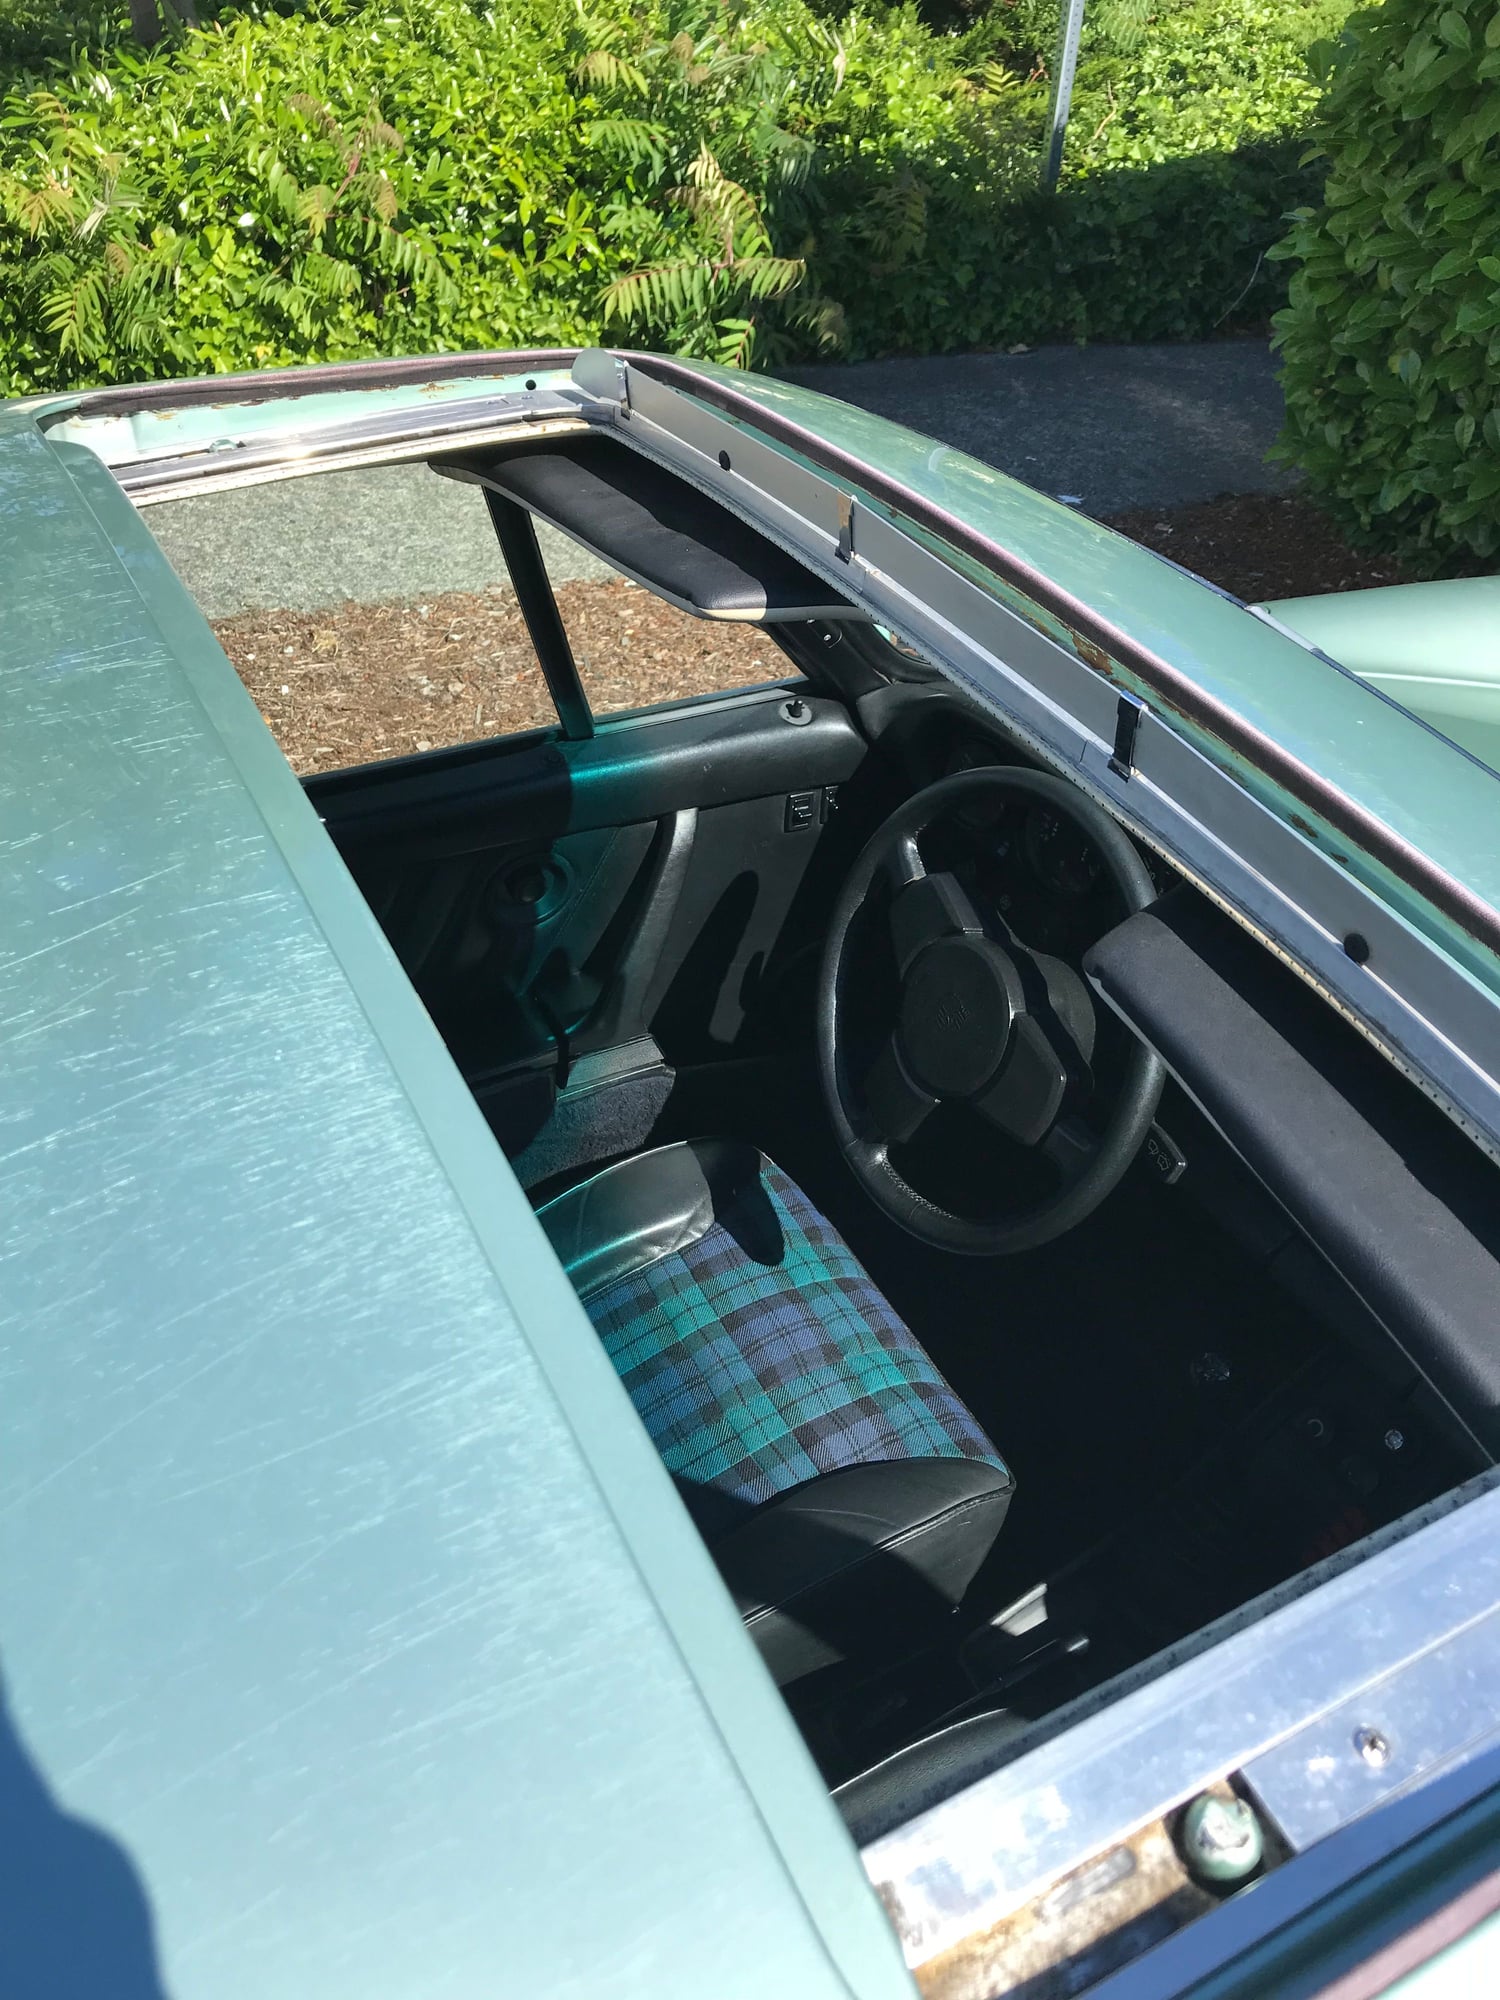 1977 Porsche 911 - Ice green metallic 930 - Used - VIN 9307800095 - 71,399 Miles - 6 cyl - 2WD - Manual - Coupe - Other - Gig Harbor, WA 98332, United States